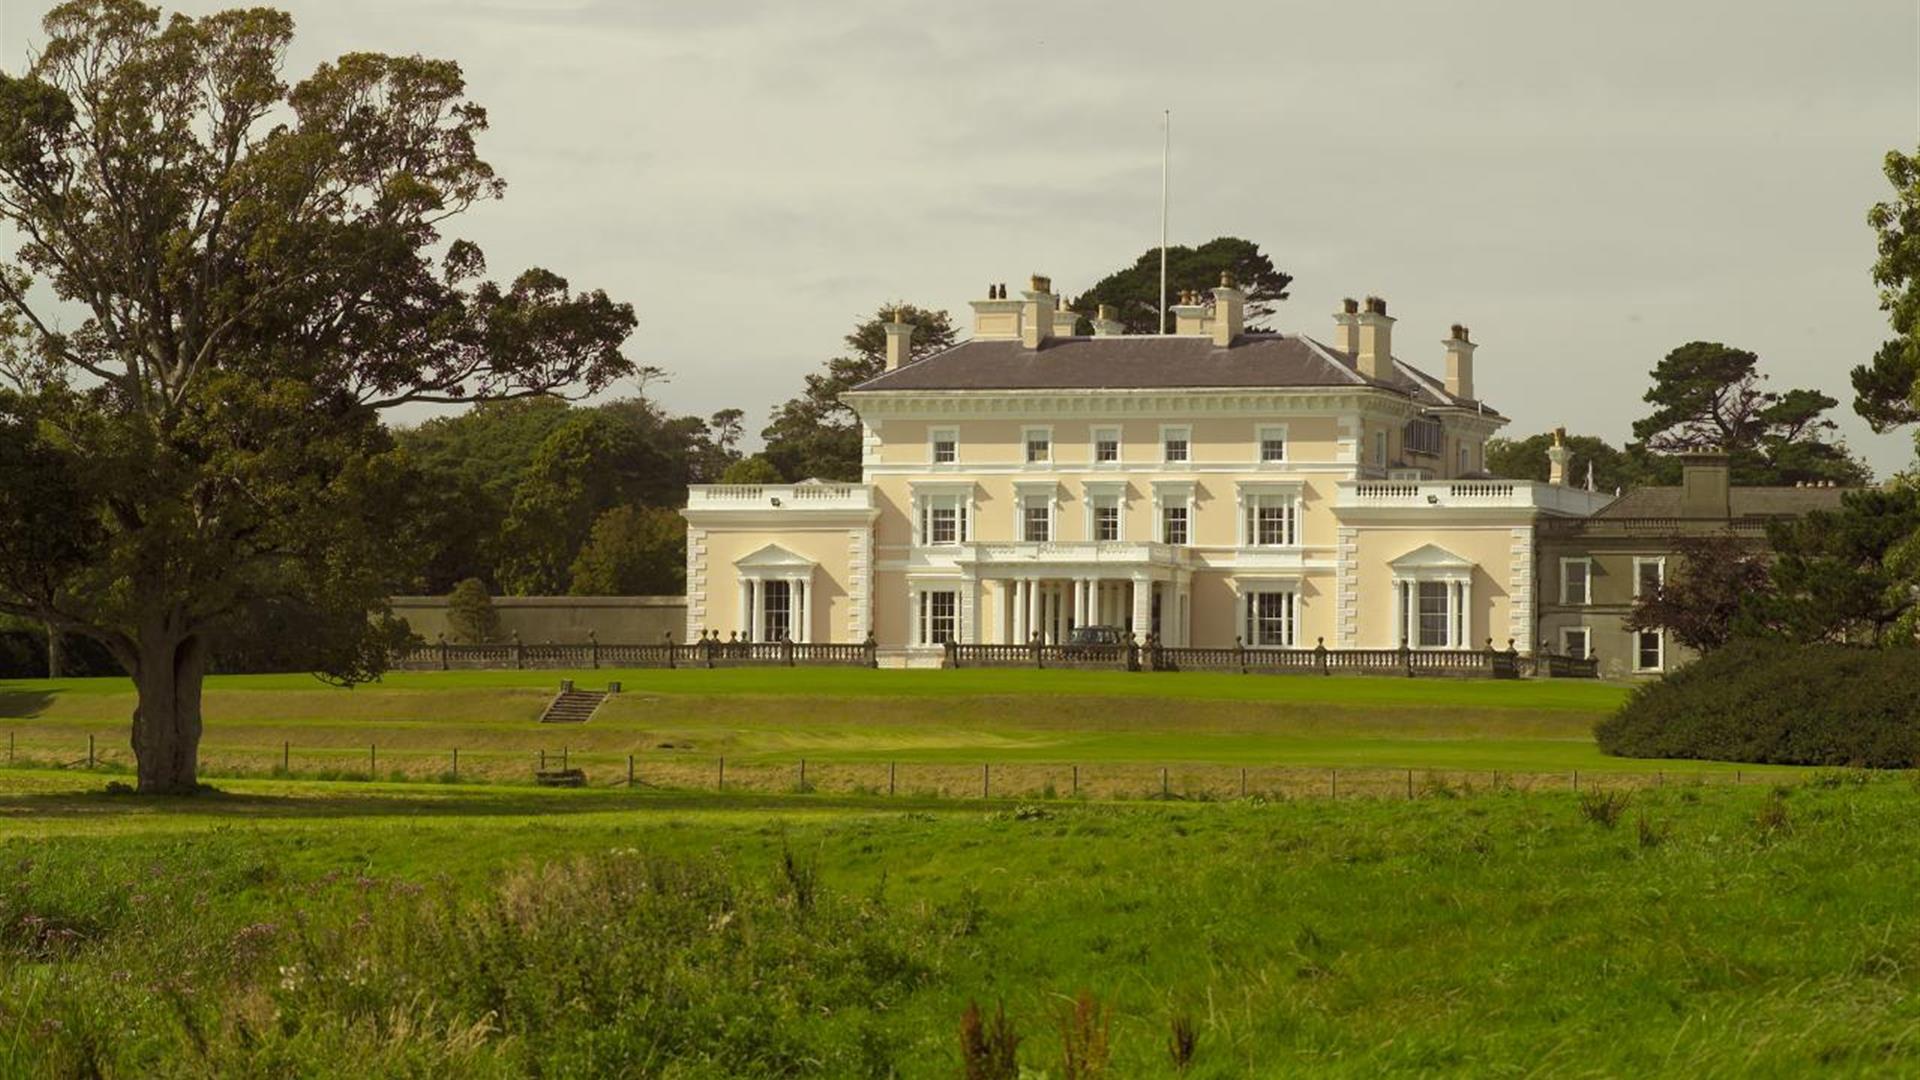 Ballywalter Park house exterior surrounding by greenery